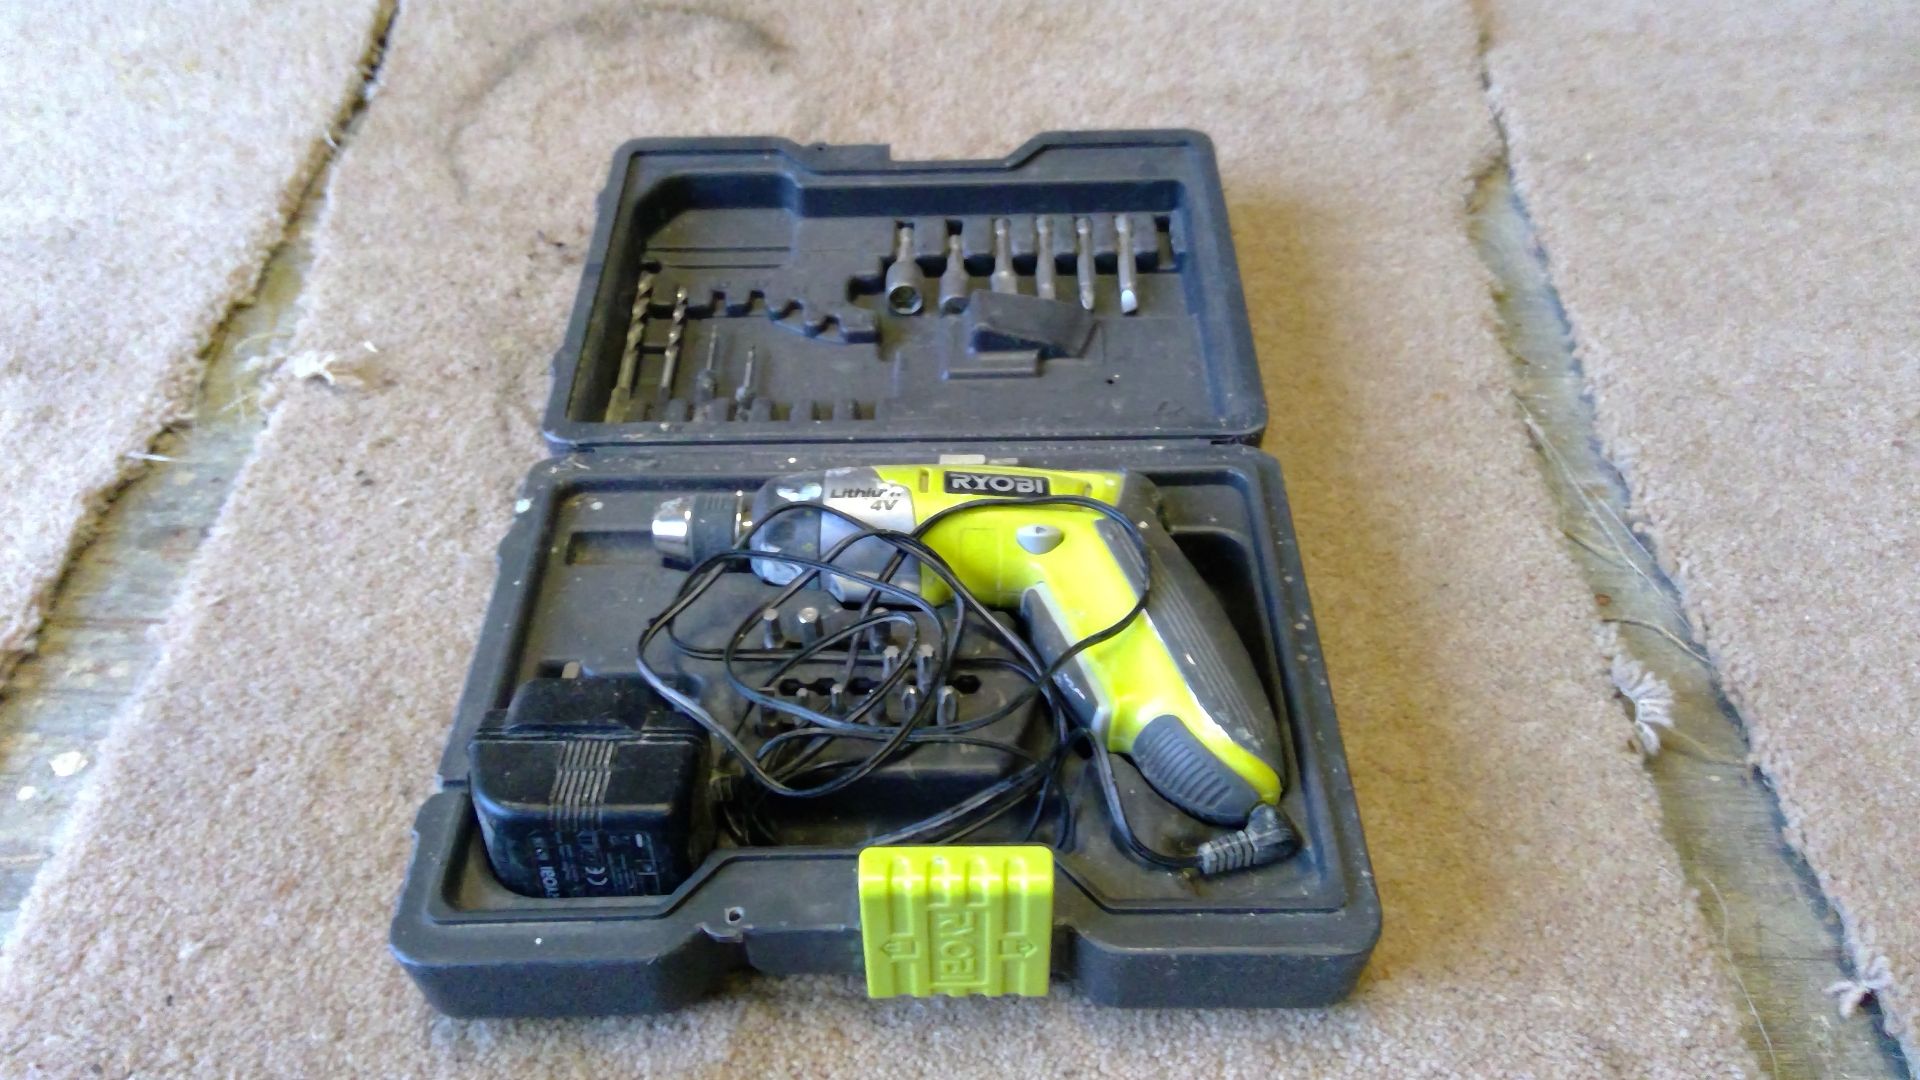 Power tools - Router, skill saw, belt sander, air tool, mini drill, battery chargers